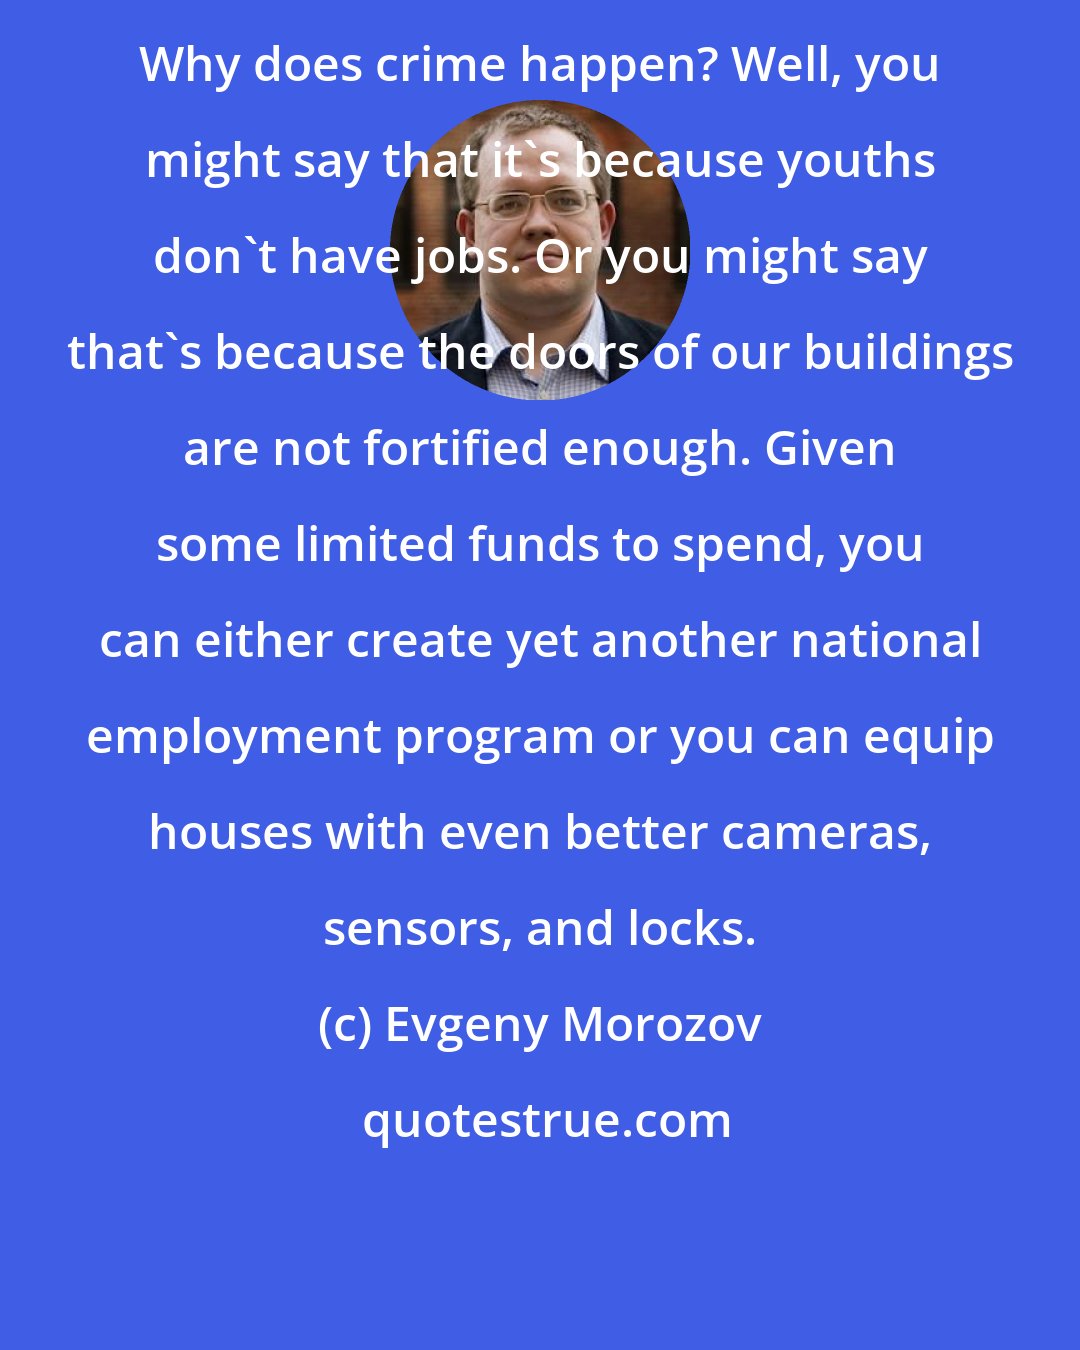 Evgeny Morozov: Why does crime happen? Well, you might say that it's because youths don't have jobs. Or you might say that's because the doors of our buildings are not fortified enough. Given some limited funds to spend, you can either create yet another national employment program or you can equip houses with even better cameras, sensors, and locks.